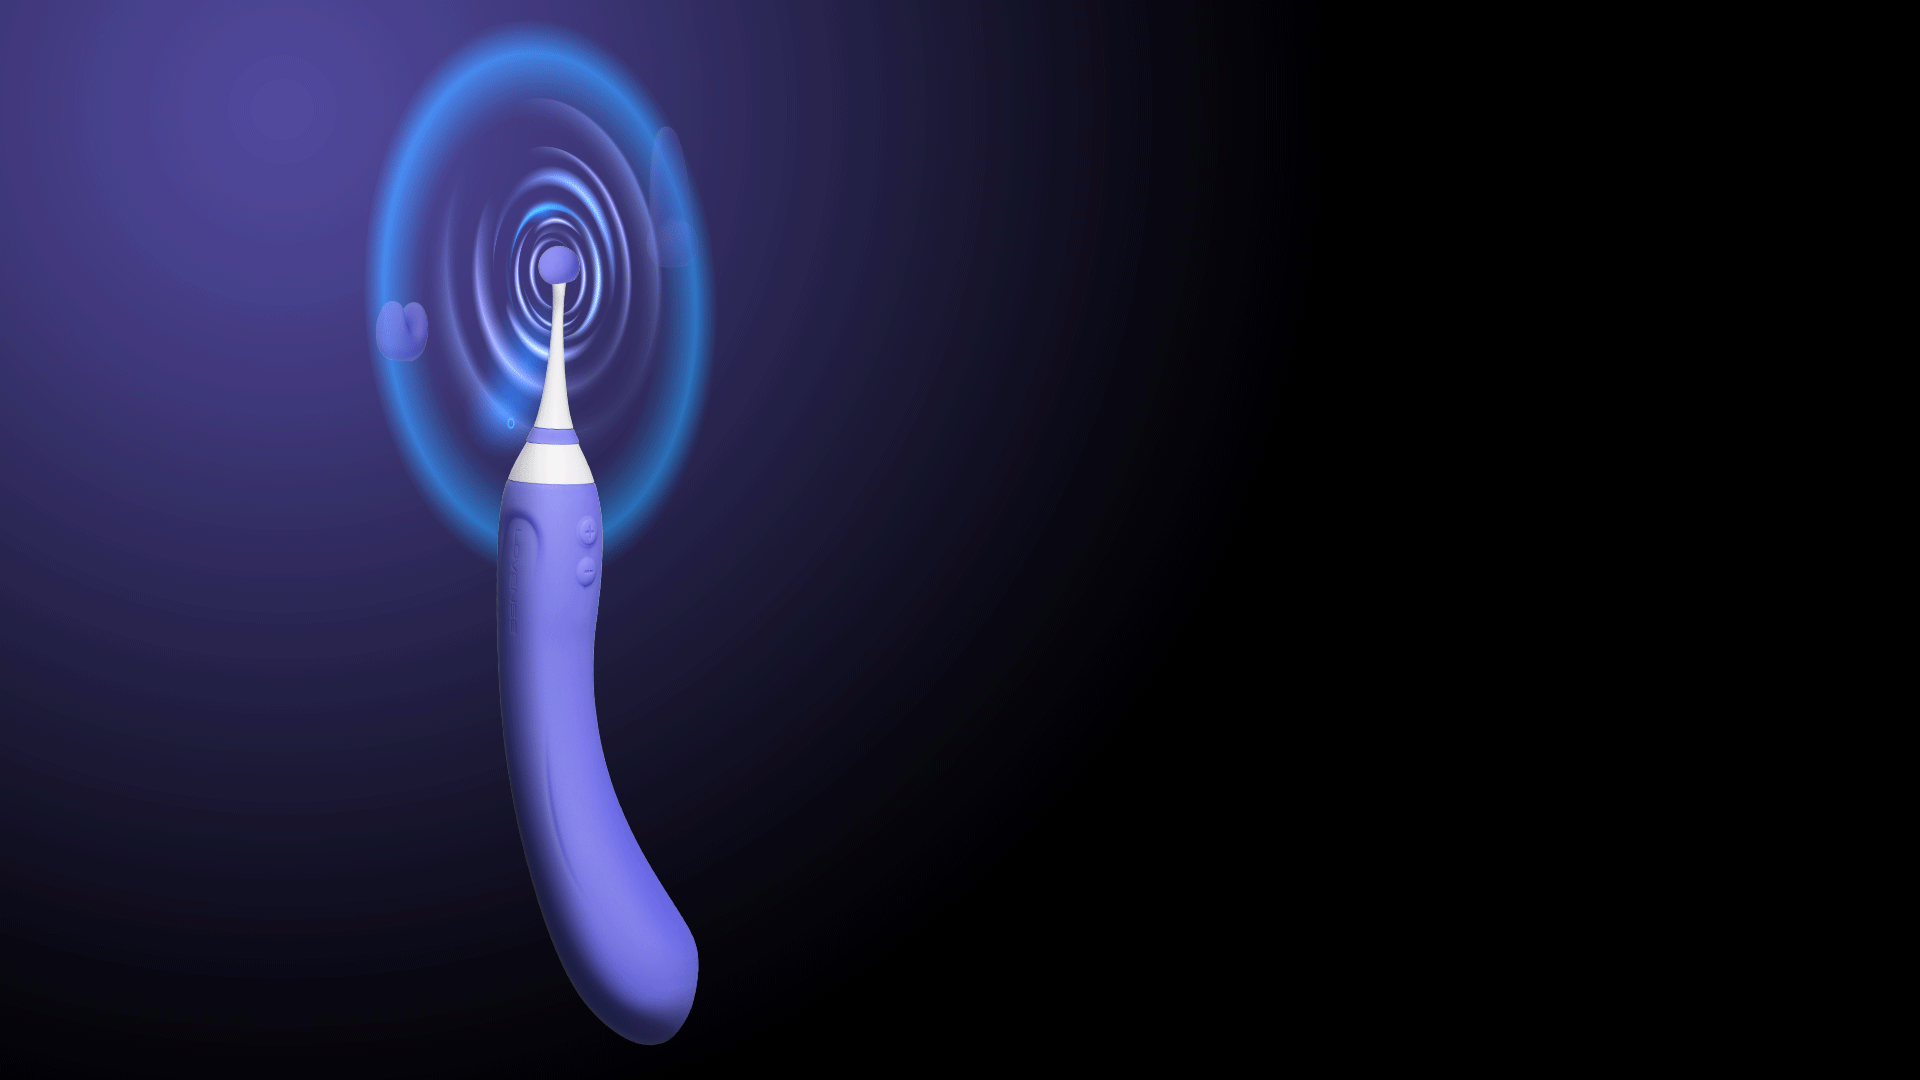 High-frequency end vibrations give you intensive orgasms